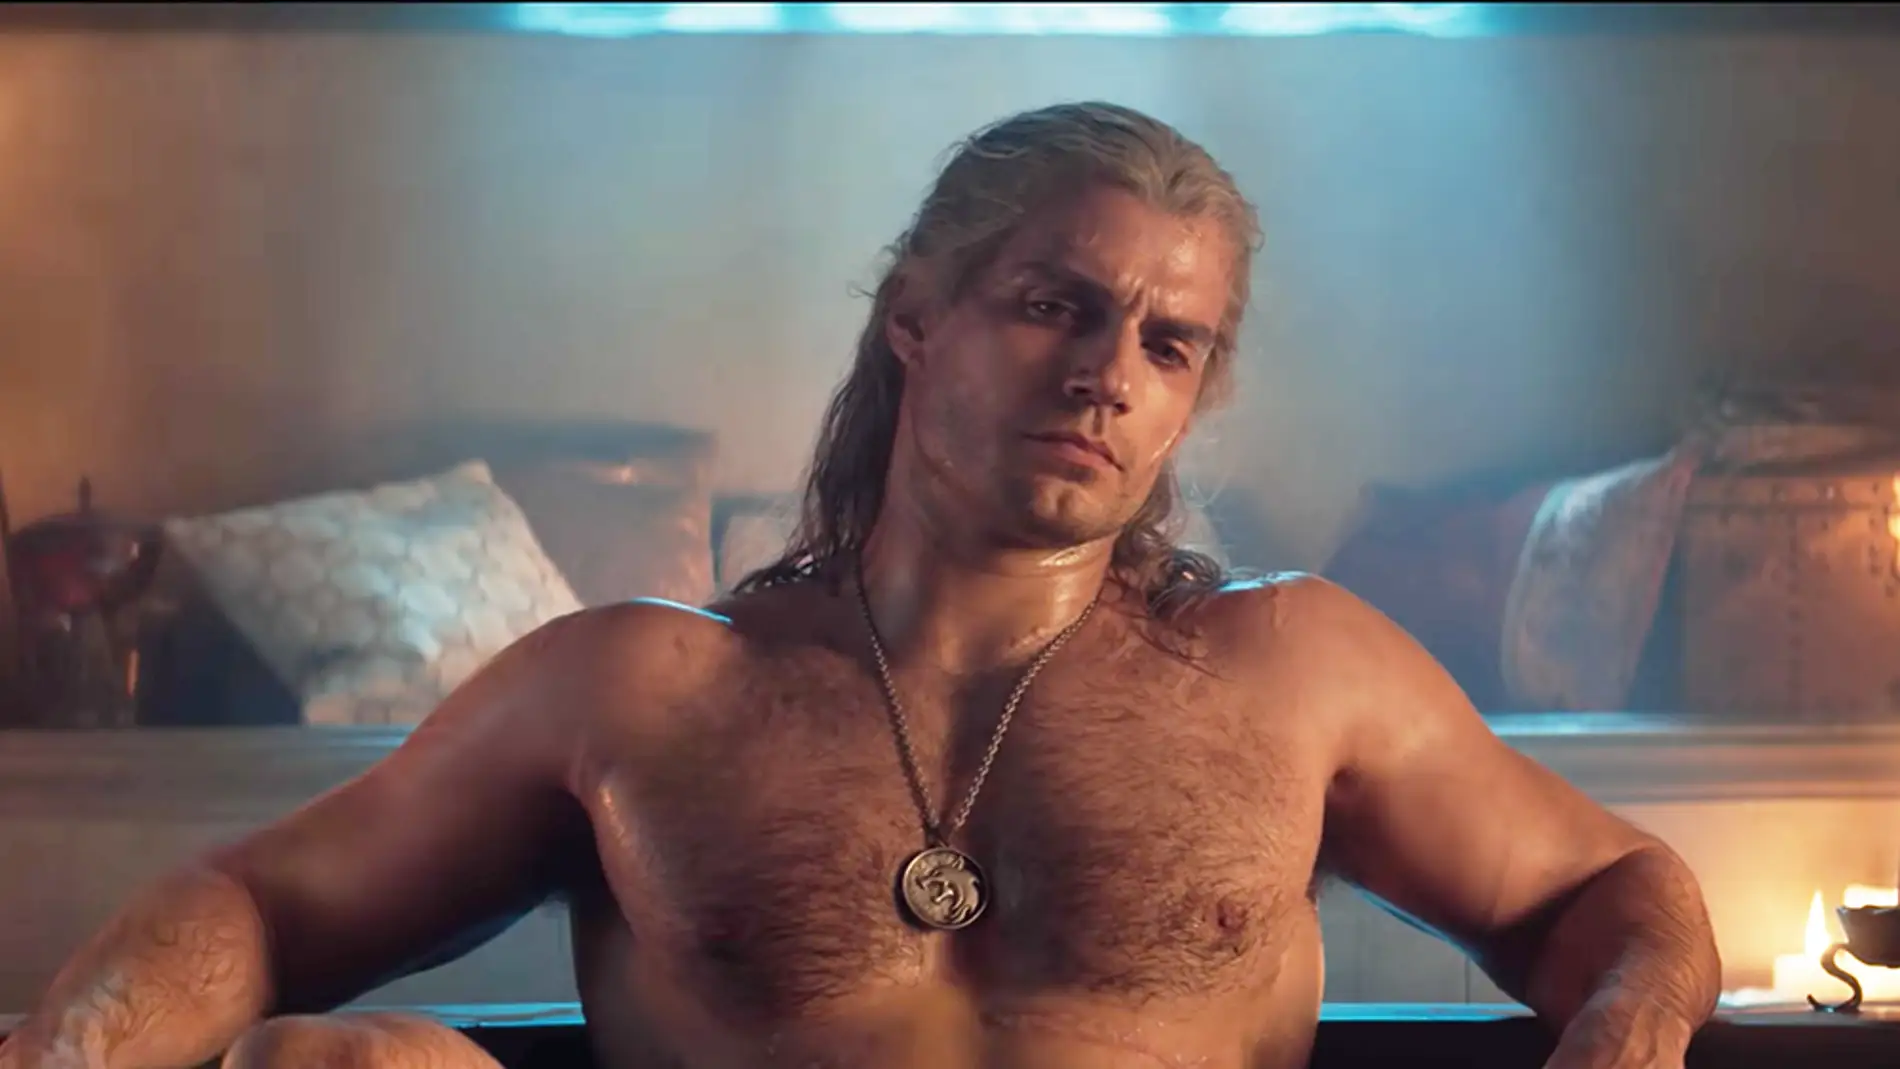 Henry Cavill en 'The Witcher'